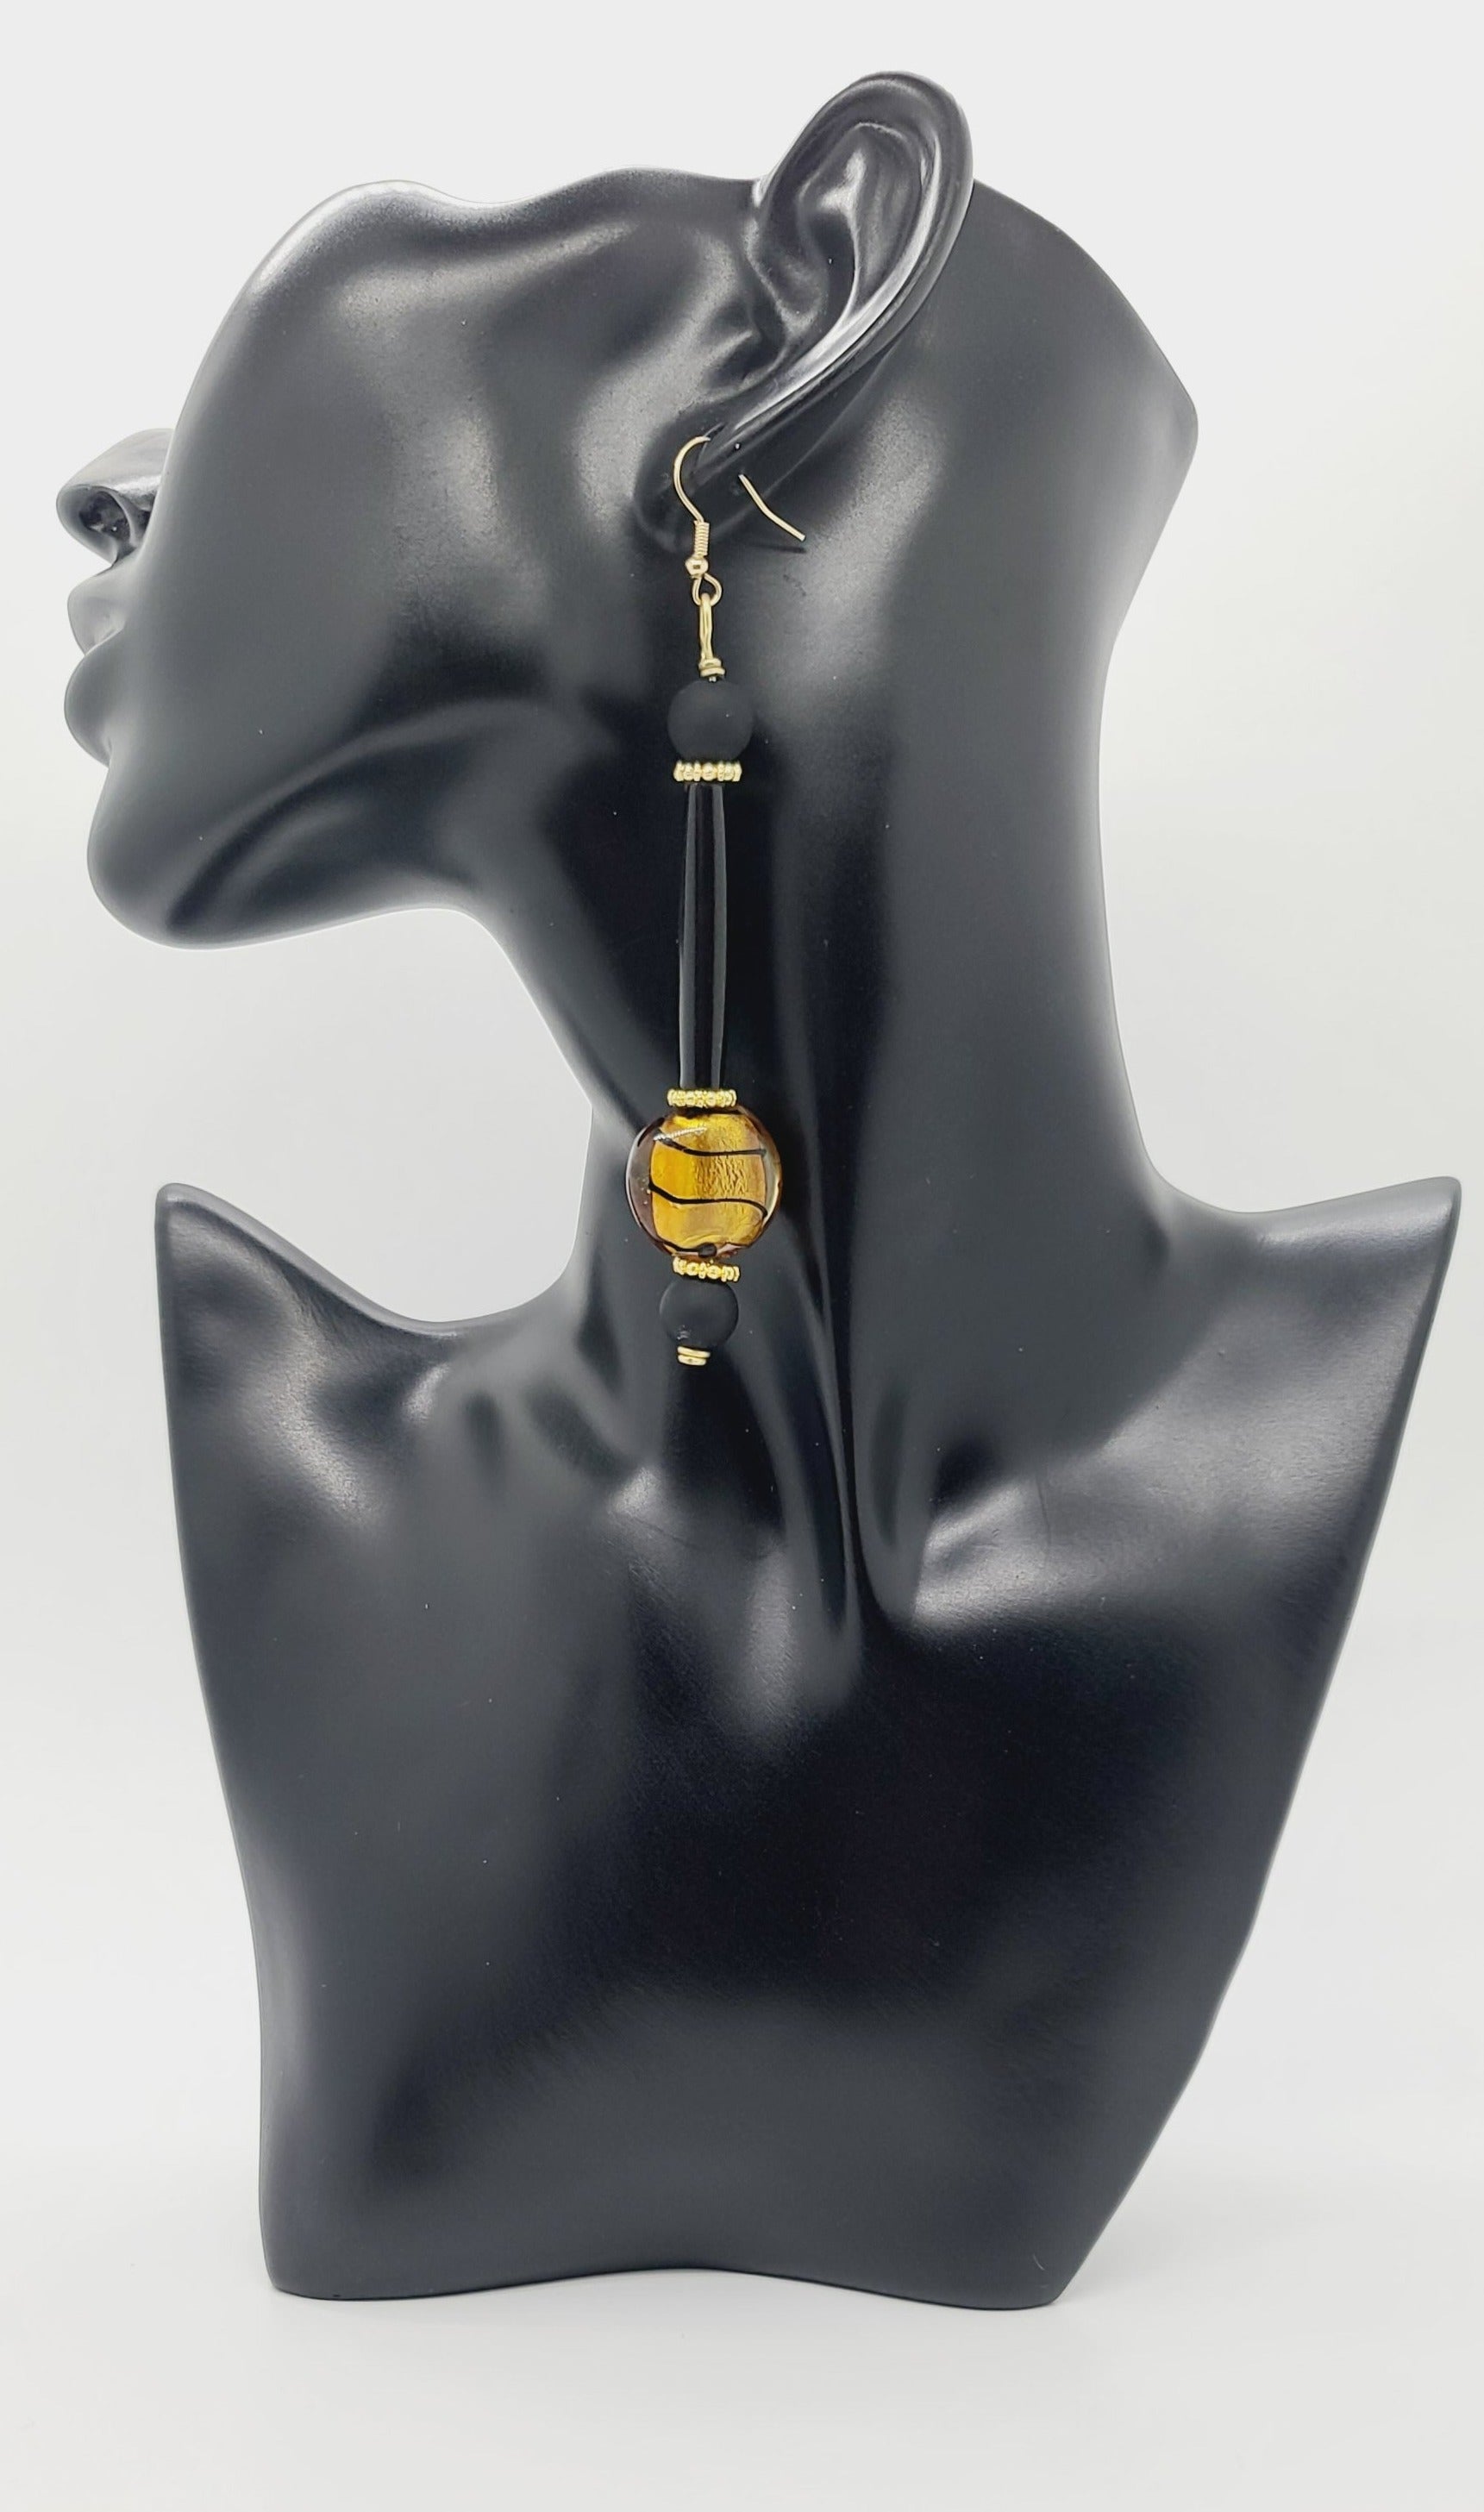 Length: 4.5 inches | Weight: 0.8 ounces  Distinctly You! These earrings are made with gold and black Italian Murano glass stones,10mm matte black glass beads, black hair bone tube, and gold rondelles.